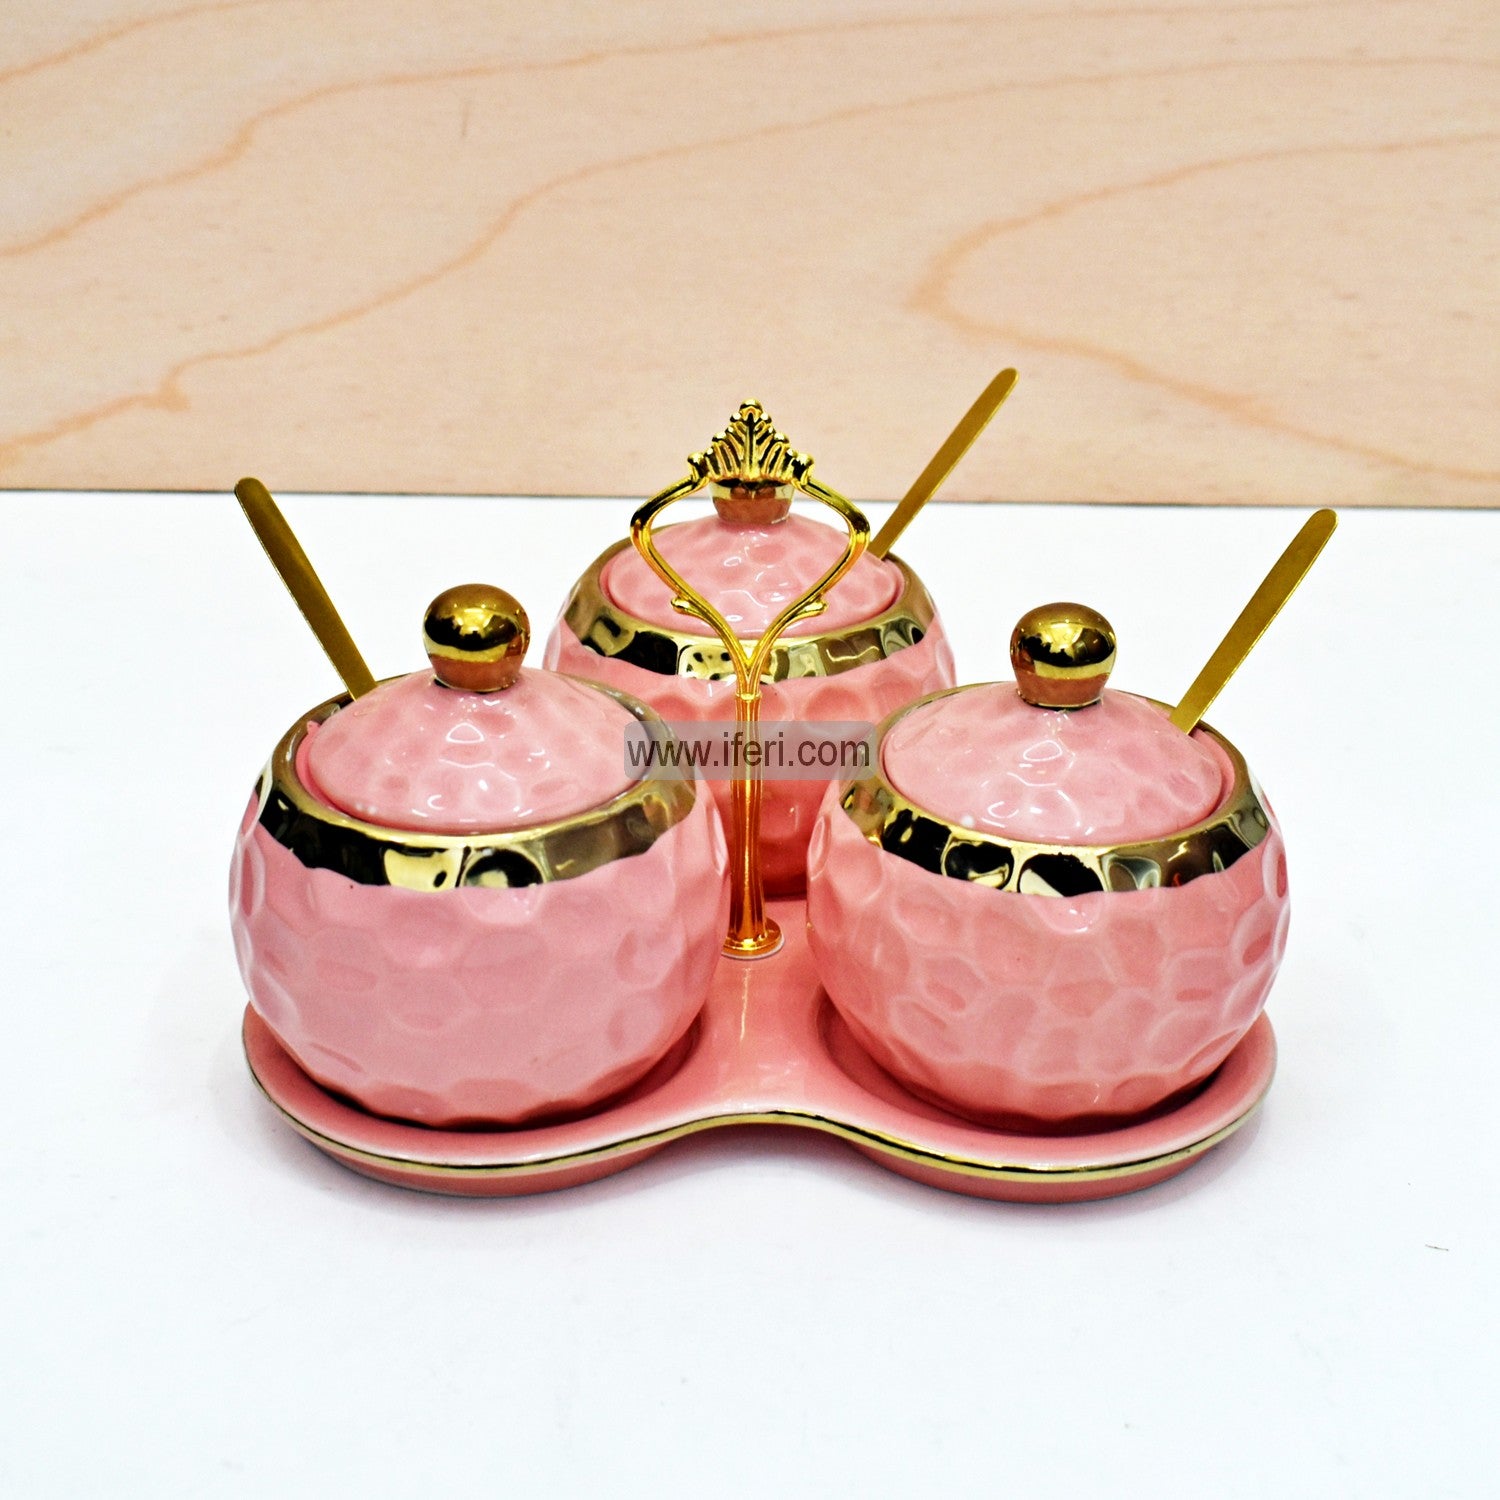 Buy Ceramic Condiment Holder, Spice Jar Set with Tray & Spoon Online from iferi.com in Bangladesh